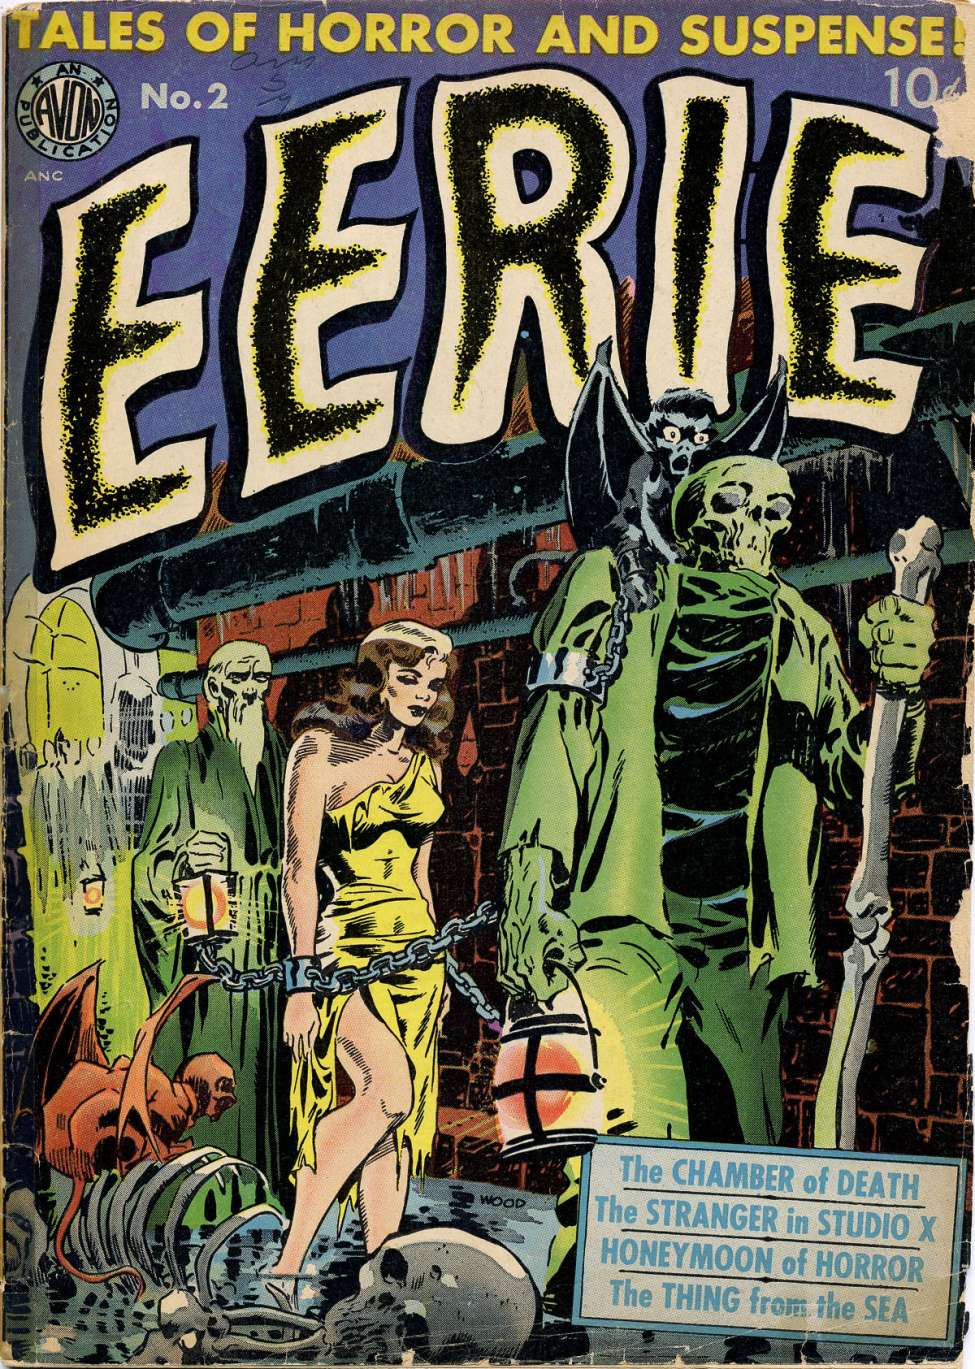 Book Cover For Eerie 2